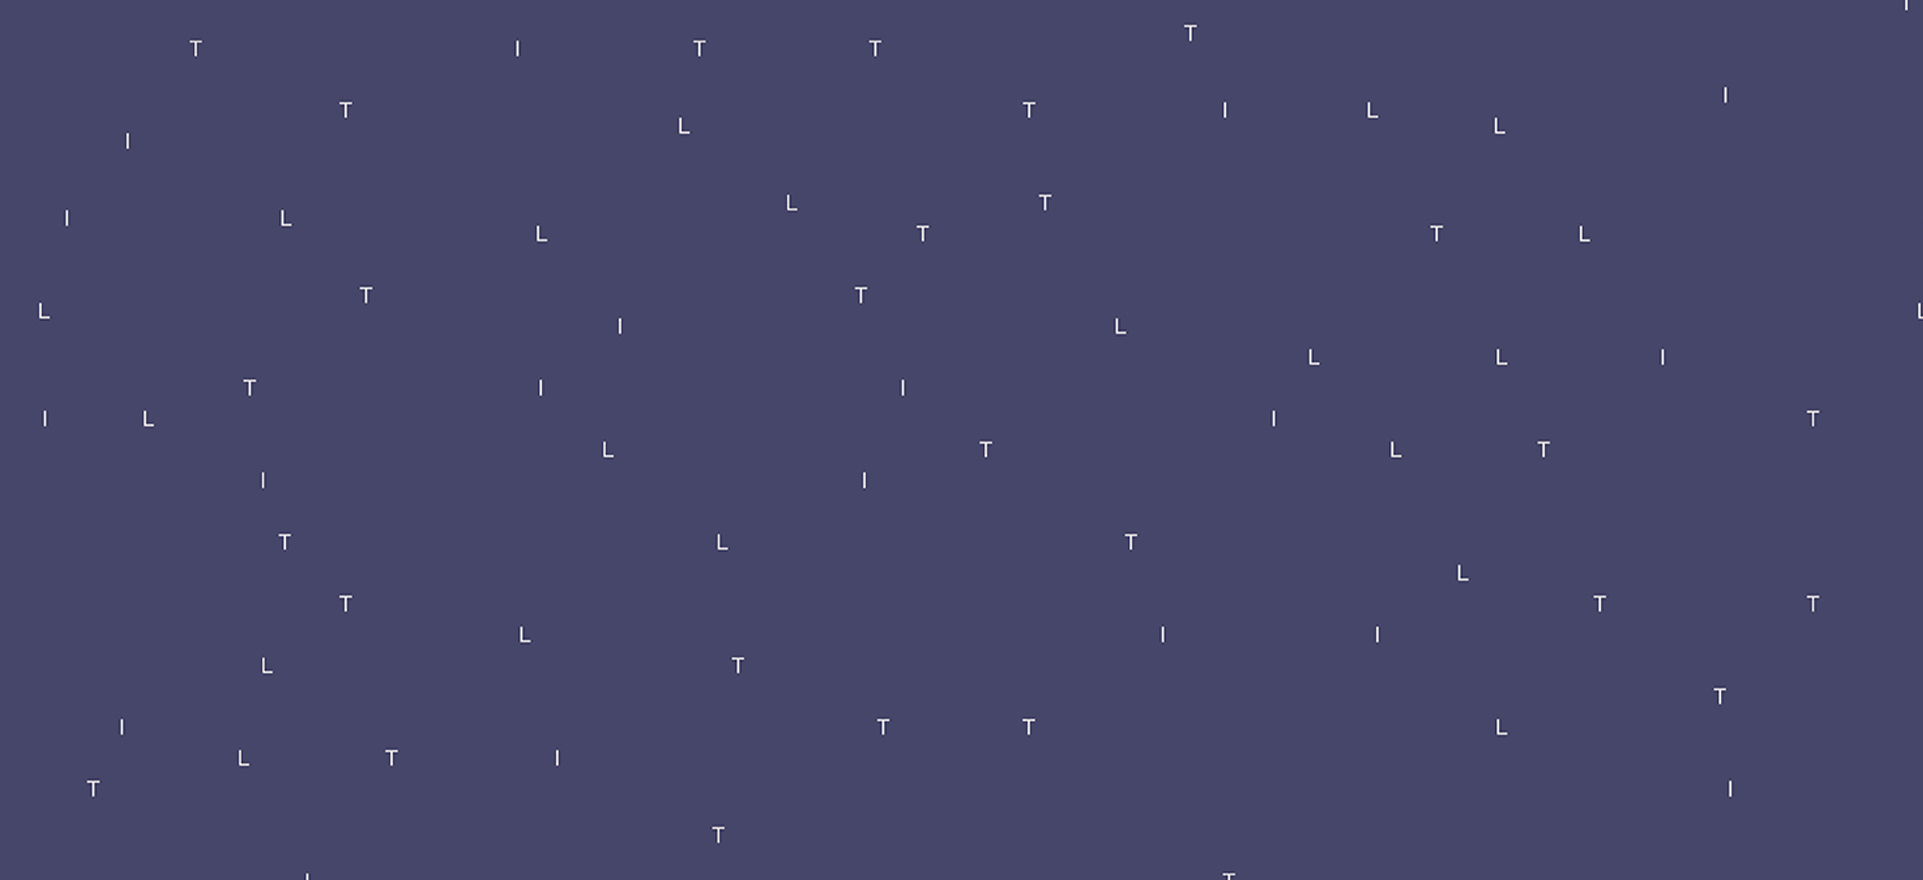 A constellation-like pattern was created from the TILT logo letters against the dark brand colour suggestive of a night sky.